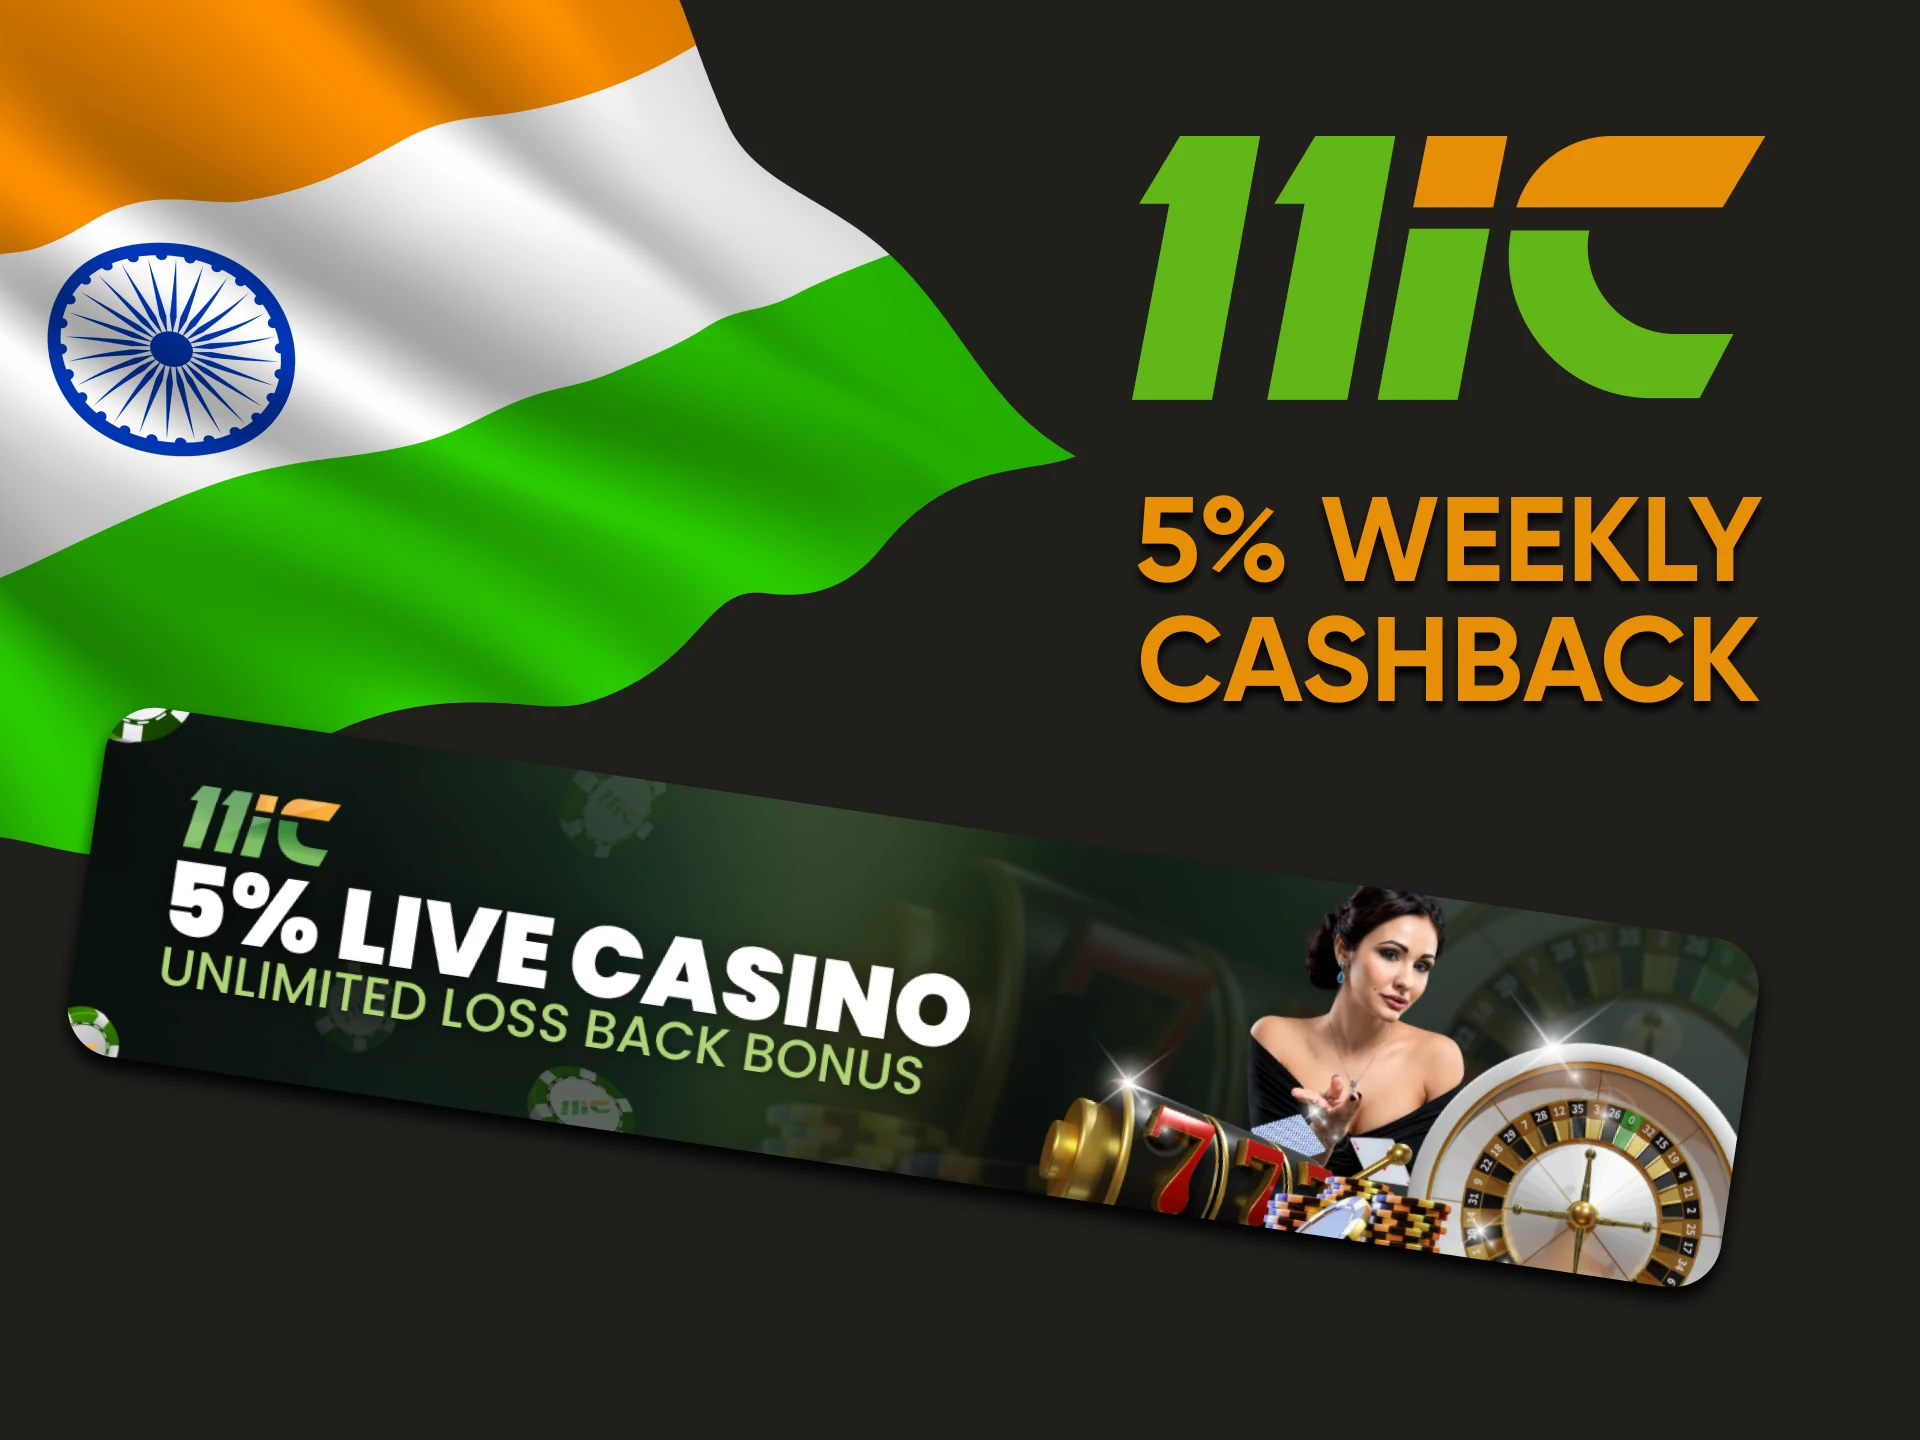 11ic gives weekly cashback to its users.